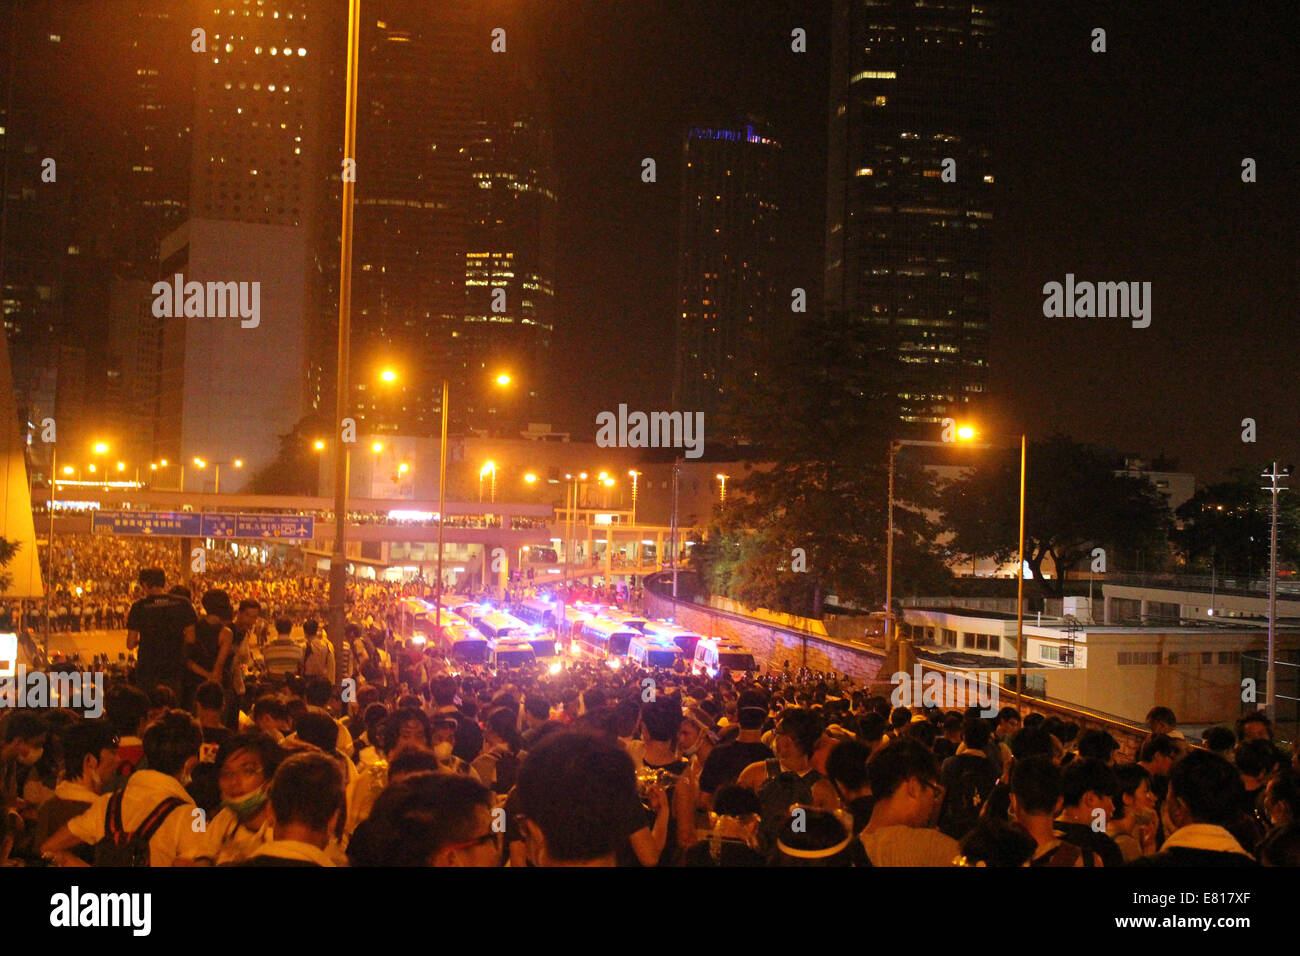 Hong Kong, 28 Sep, 2014. Hong Kong Protests: Harcourt Road, Central, a busy road in Hong Kong, is blocked as part of Occupy Central's pro-democracy civil disobedience campaign. Police vans with flashing lights stand behind police lines. Credit:  Robert SC Kemp/Alamy Live News Stock Photo